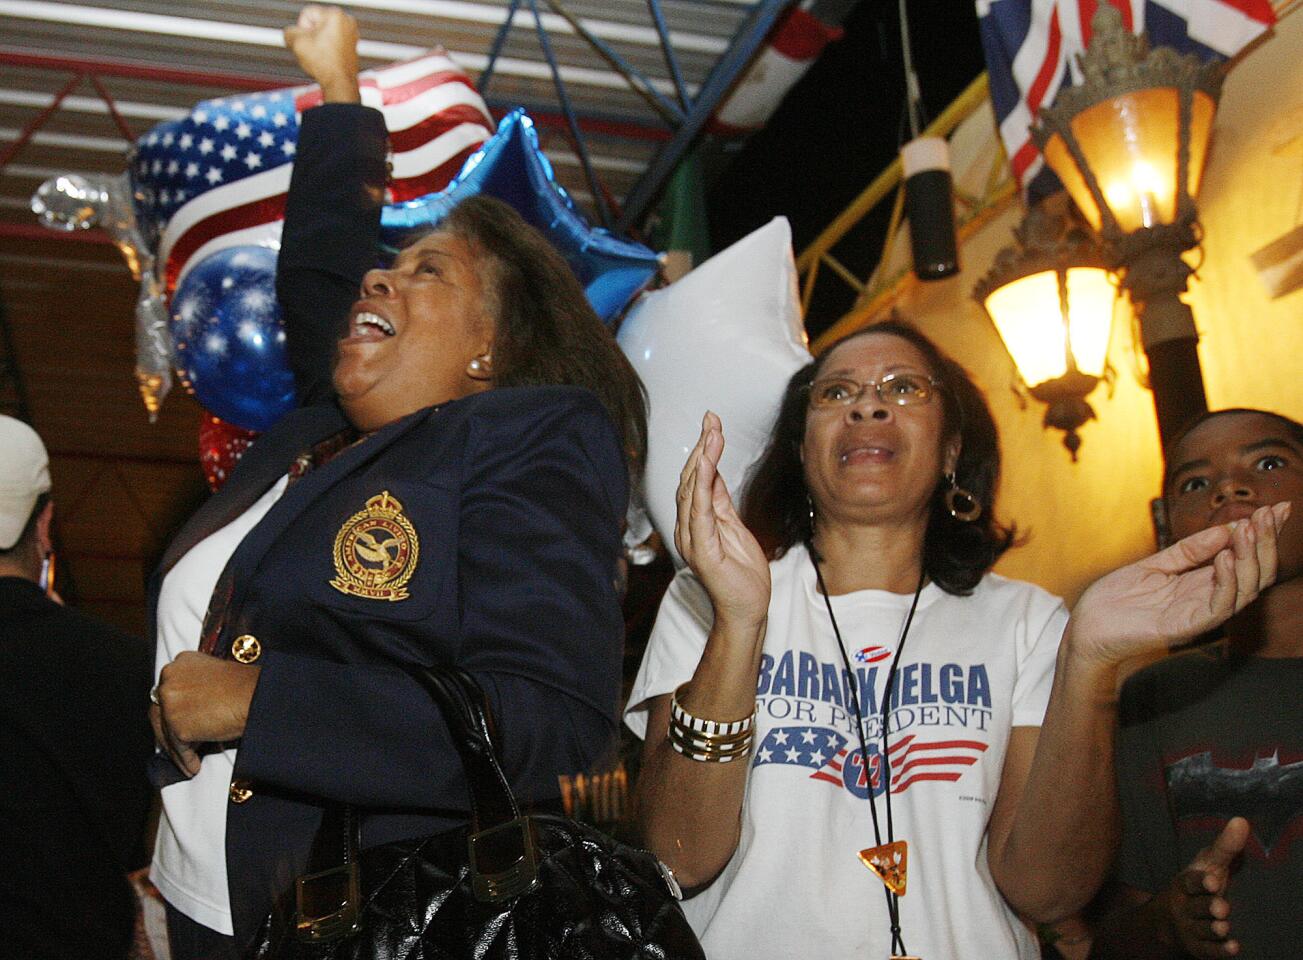 Pamela Wilson, of Tuluca Lake, and Helga Kuhn, of South Pasadena, celebrate the announcement of President Barack Obama being re-elected to his second term as President of the United States at a Democrat Party celebration at Burger Continental in Pasadena on Tuesday, November 6, 2012.